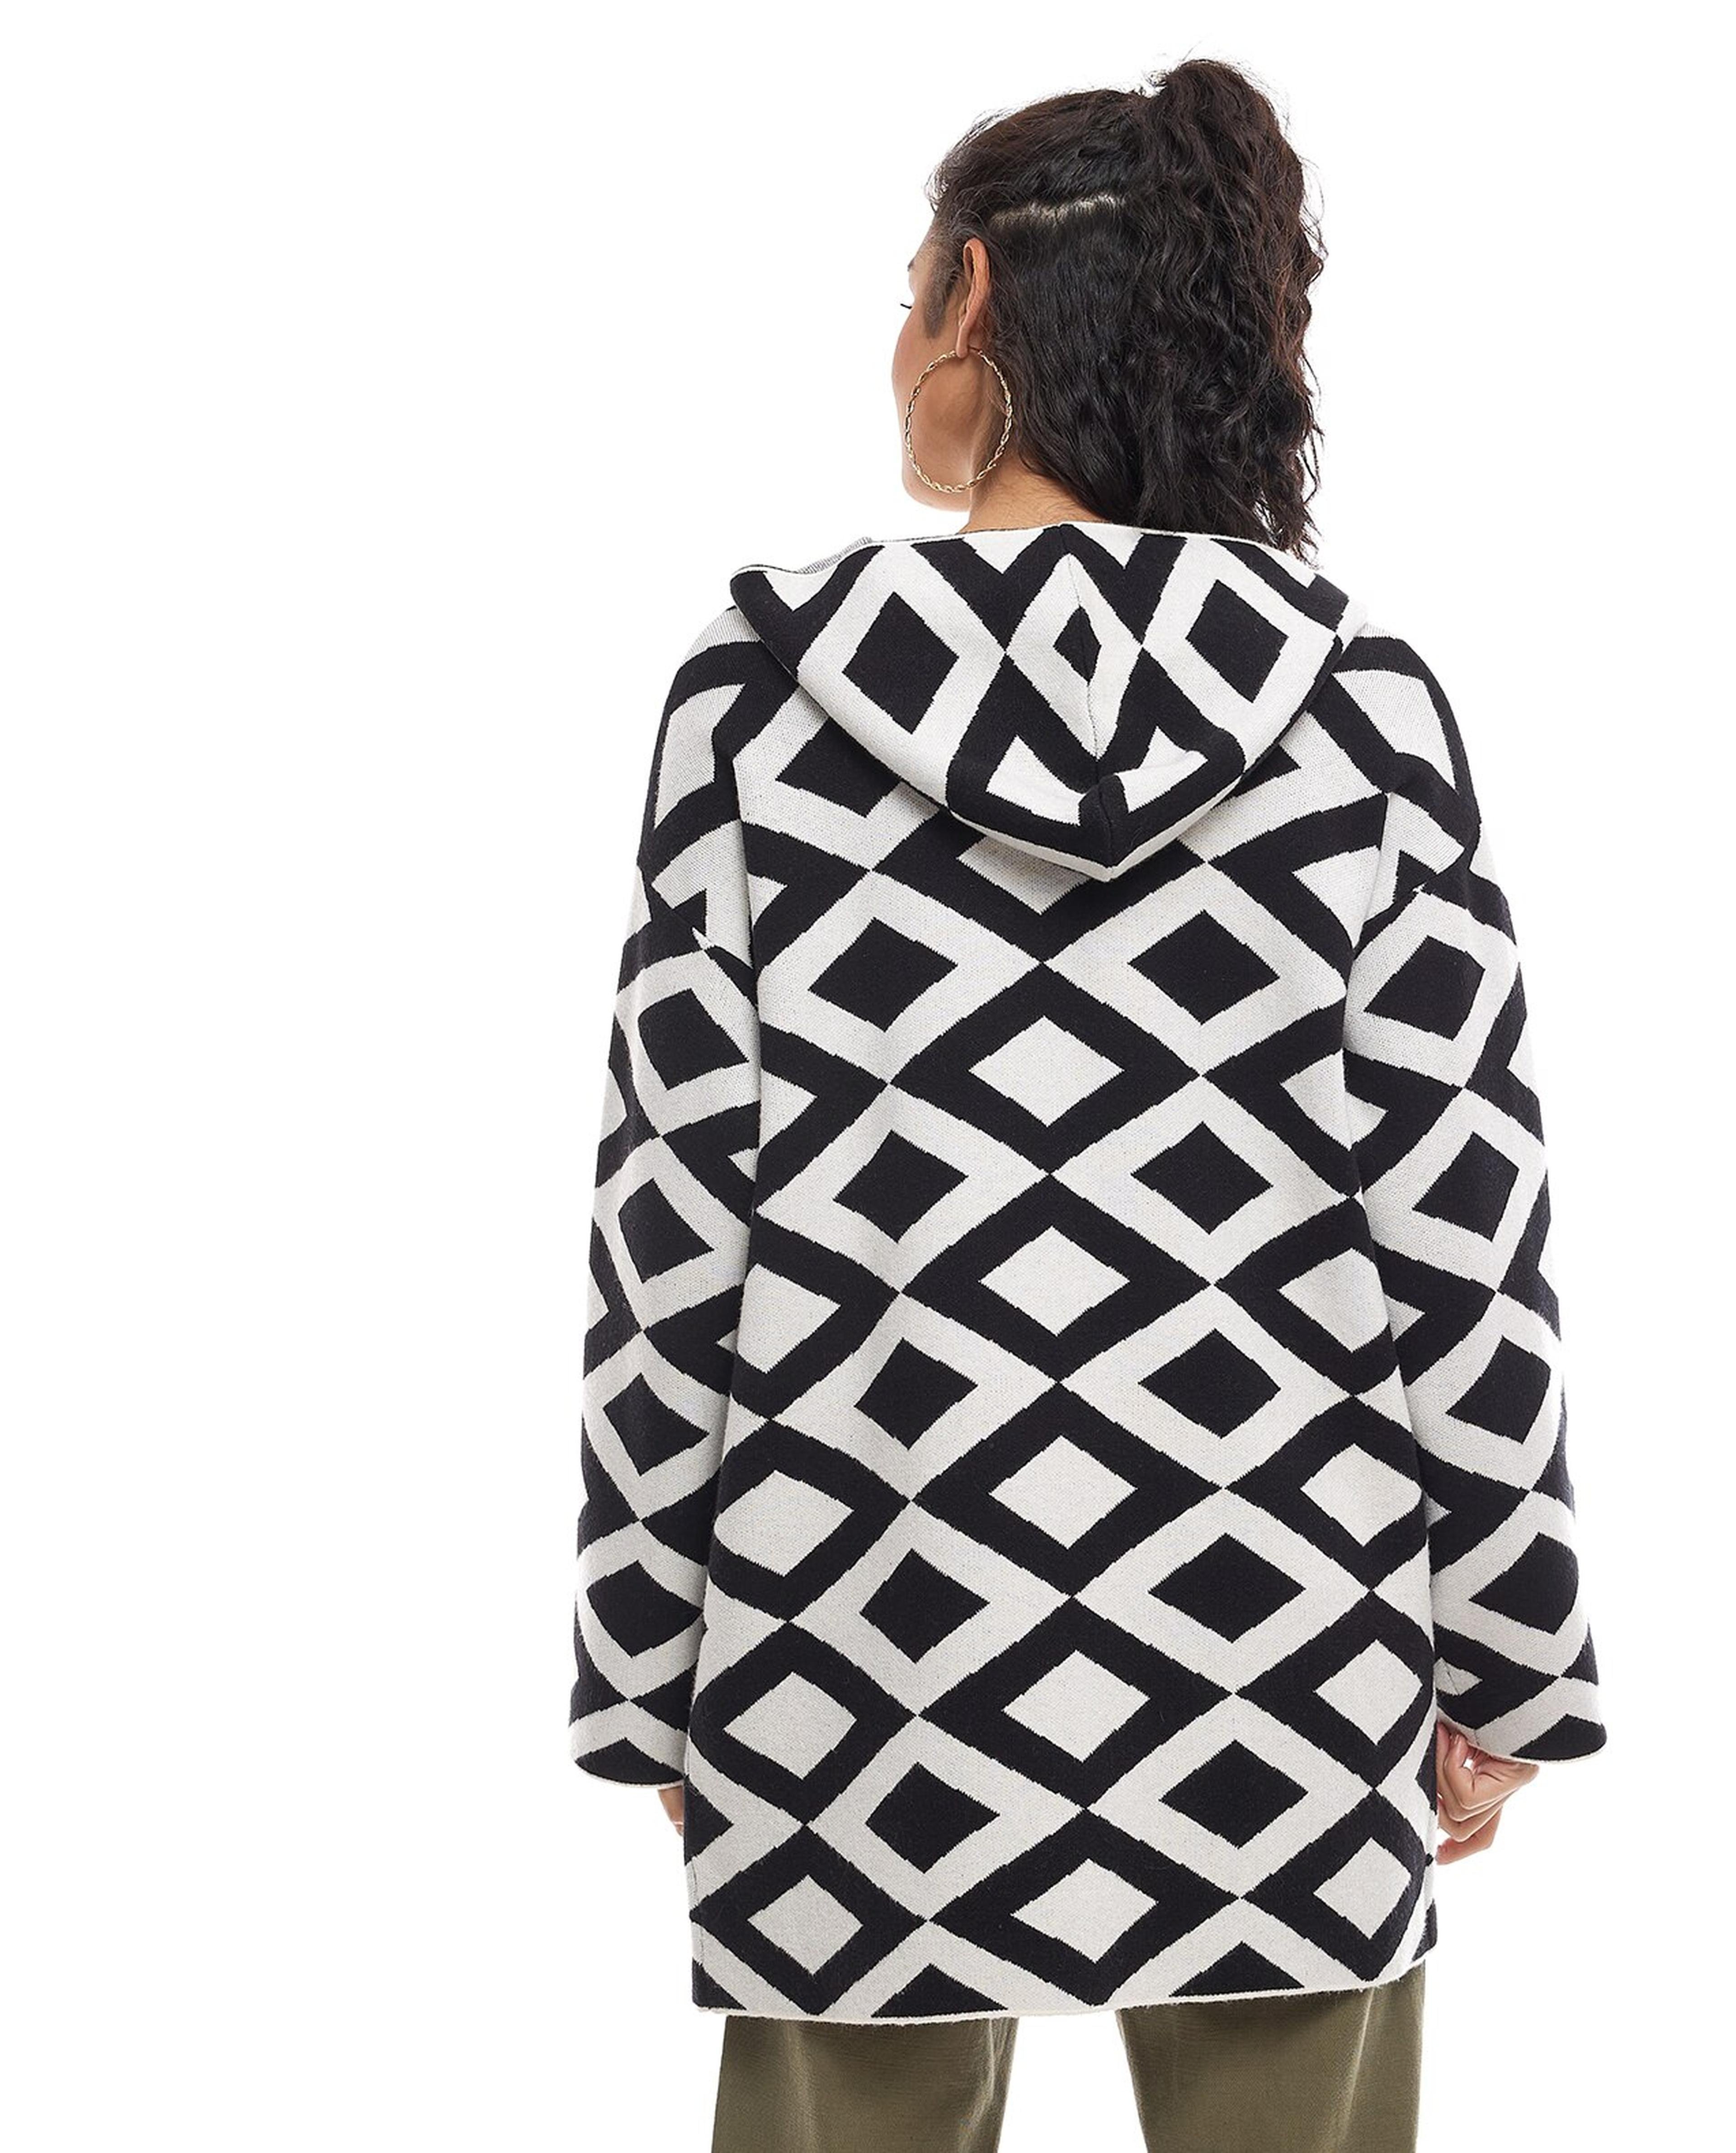 Patterned Hooded Cardigan